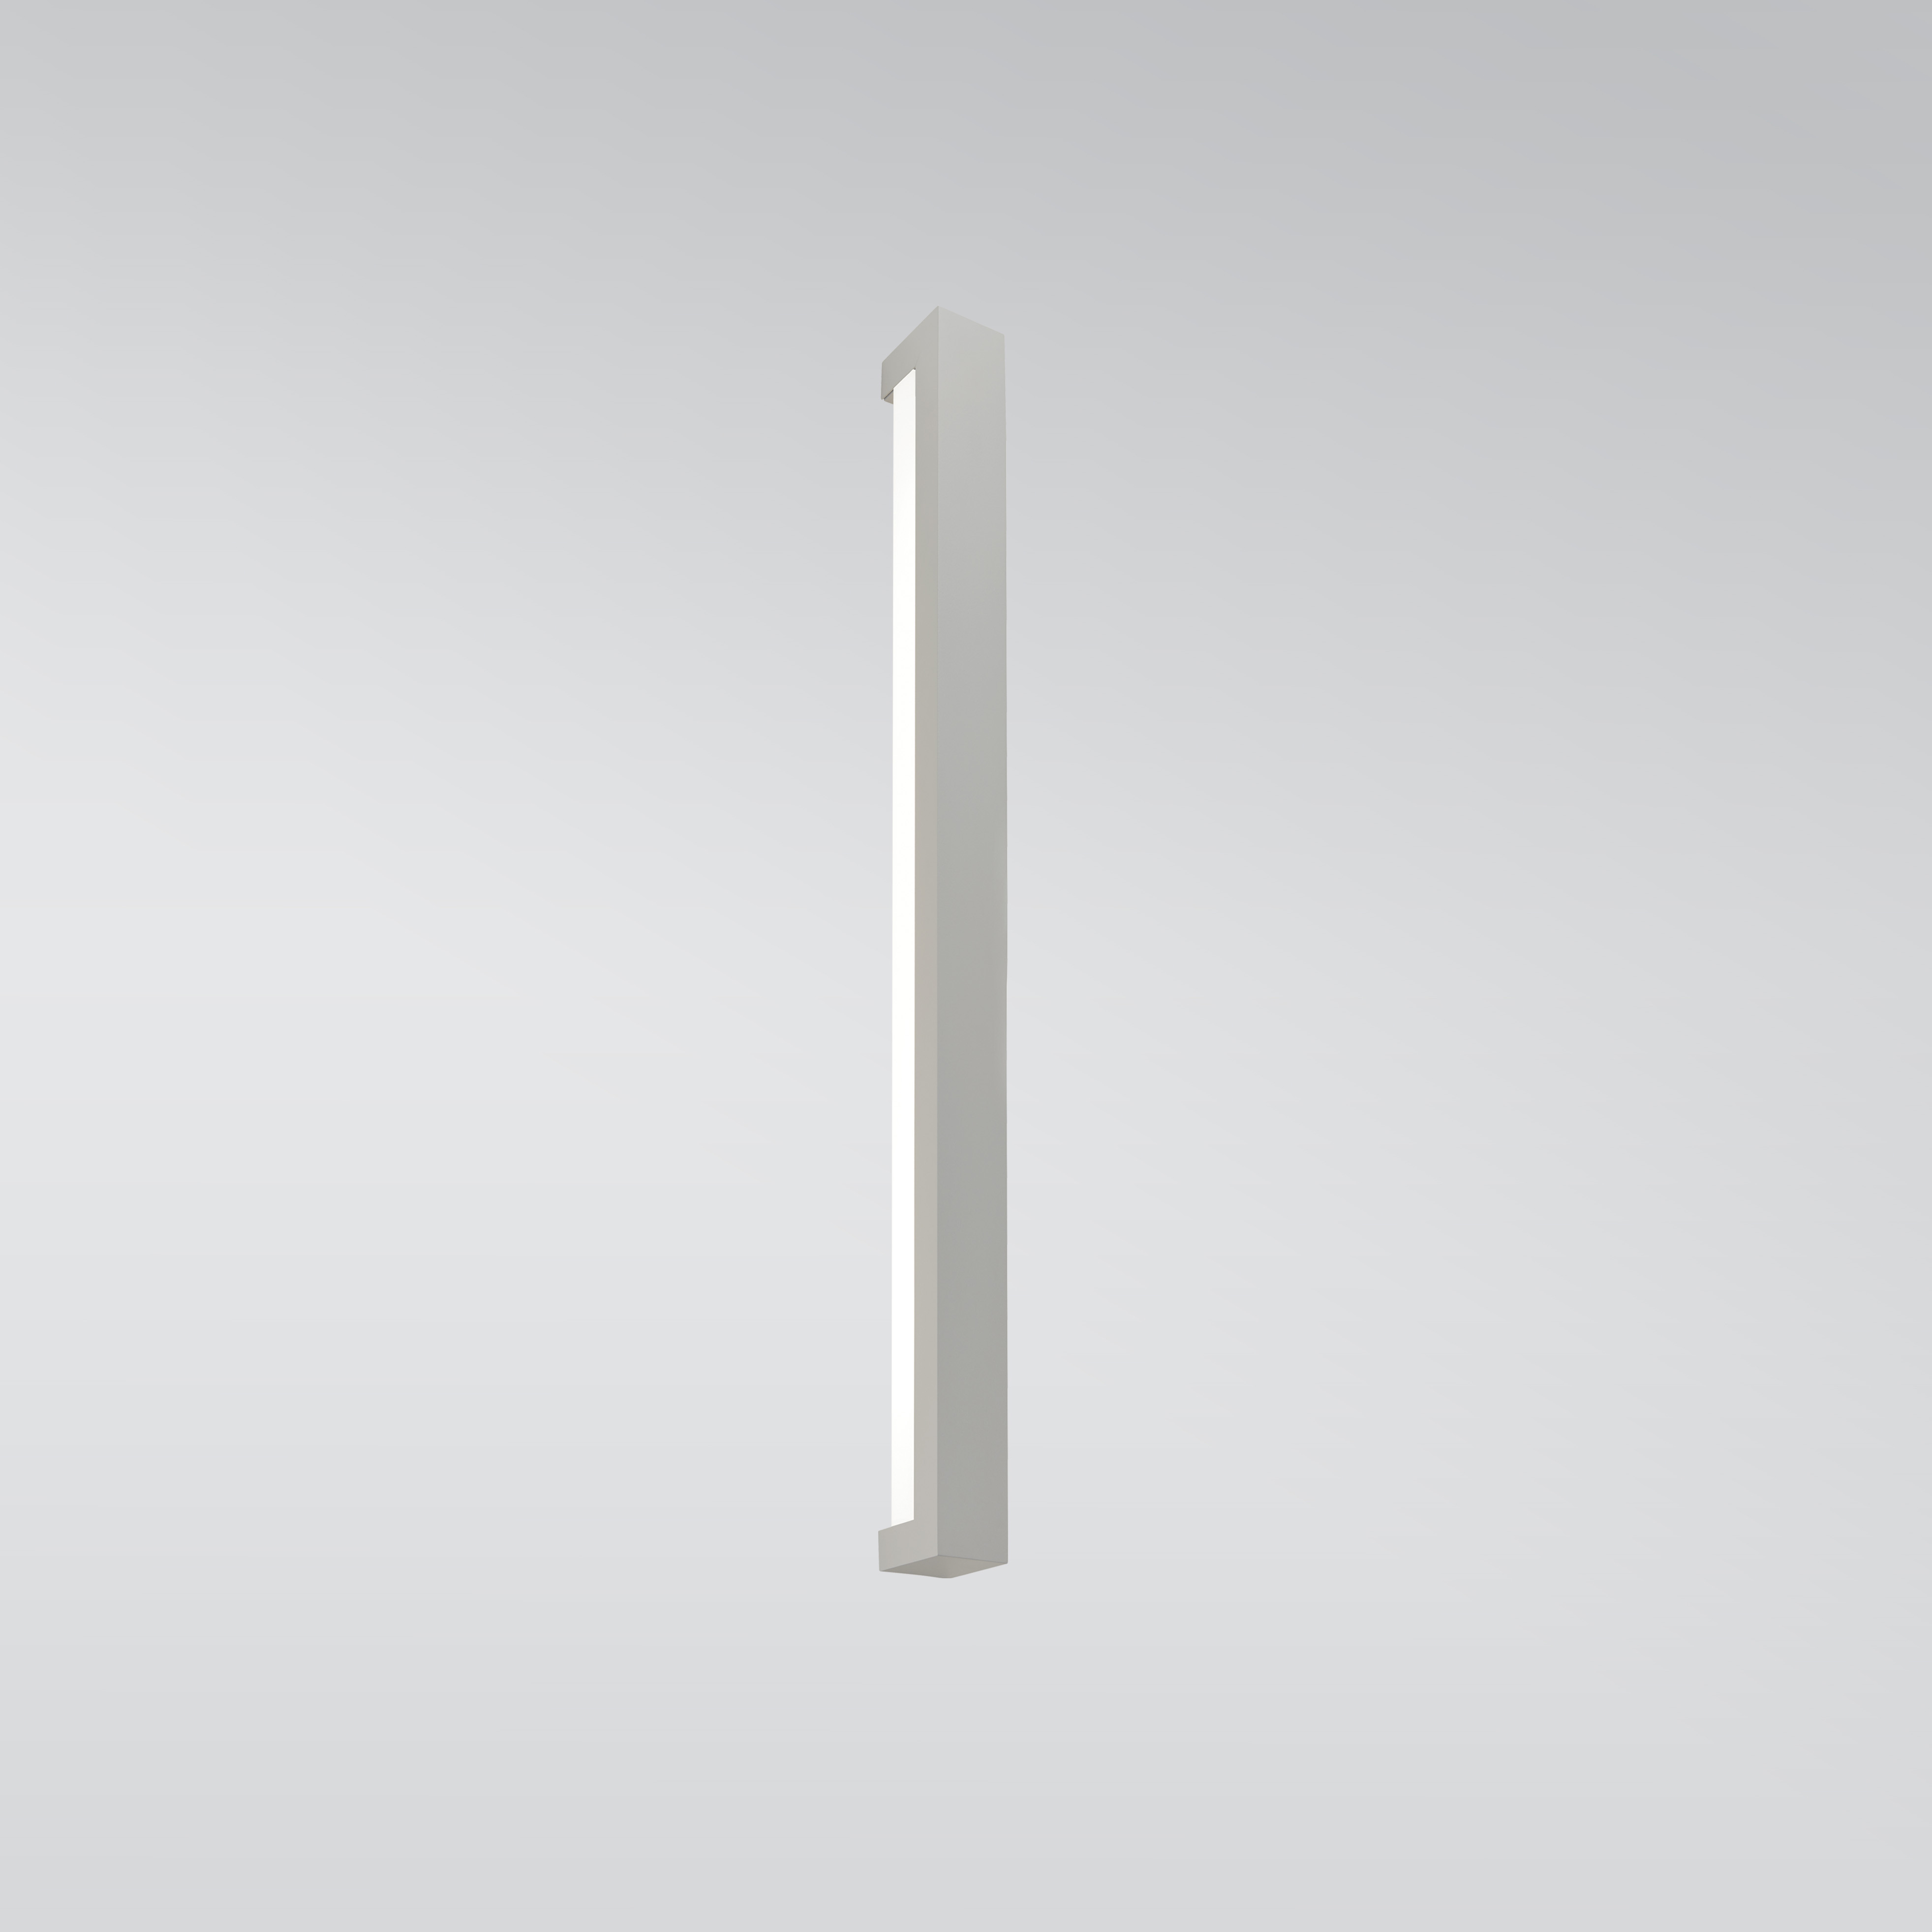 A linear wall sconce with a solid outer body and a luminous diffuser underneath